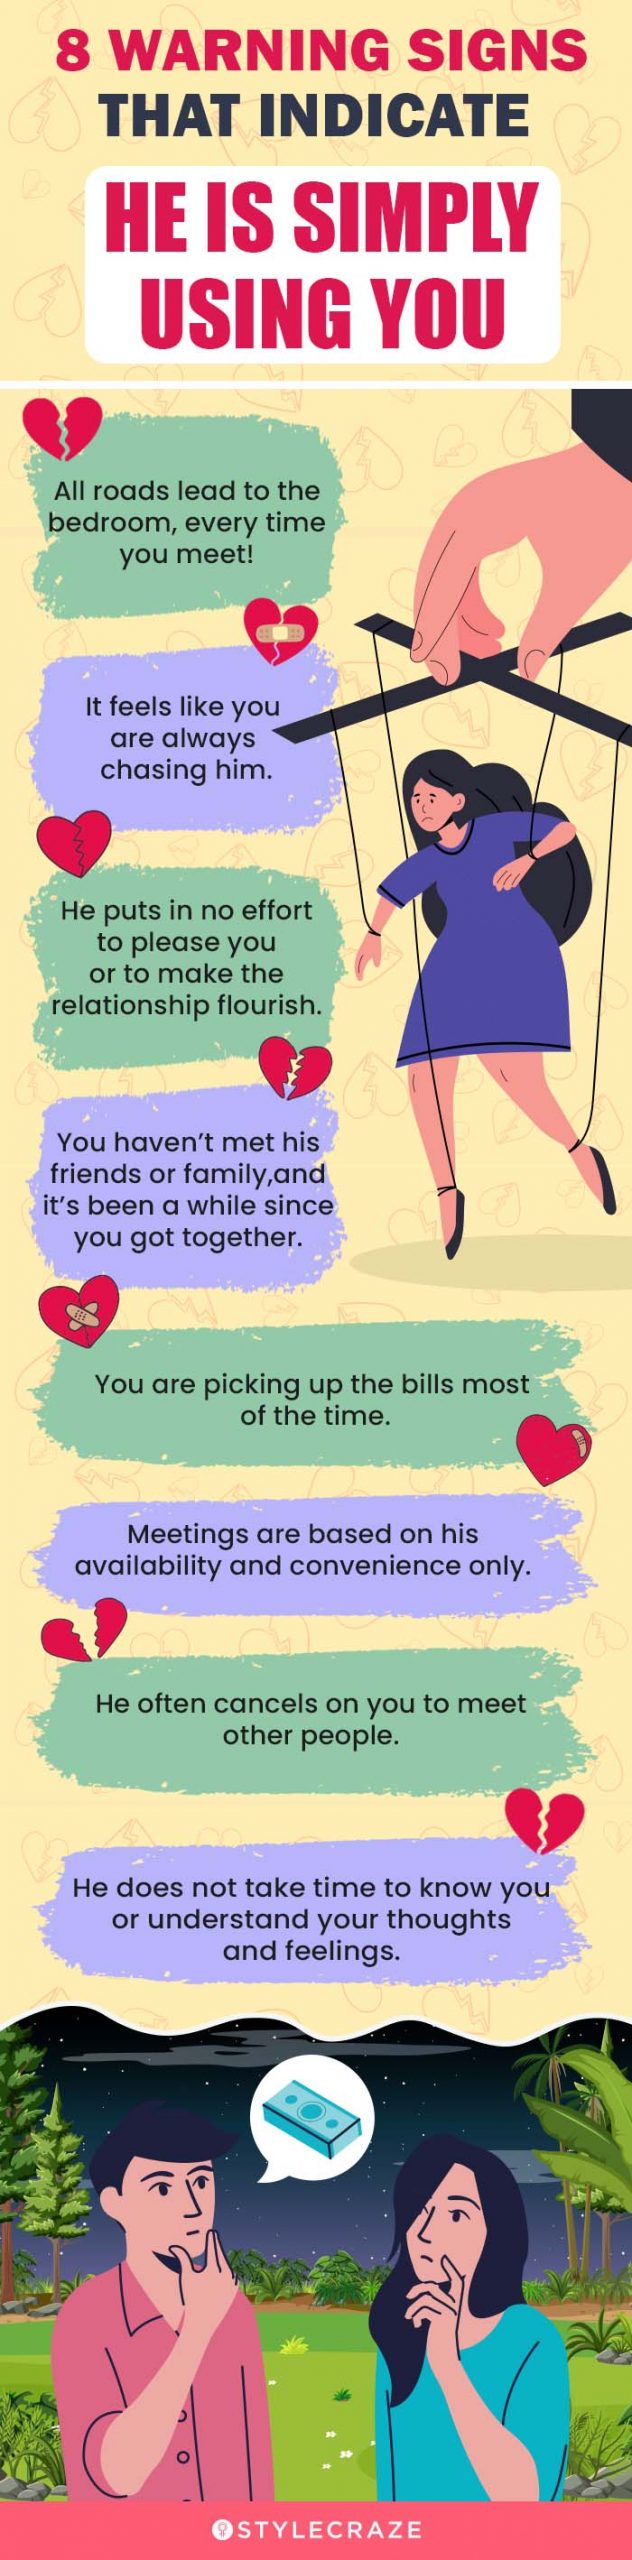 8 warning signs that indicate he is simply using you [infographic]